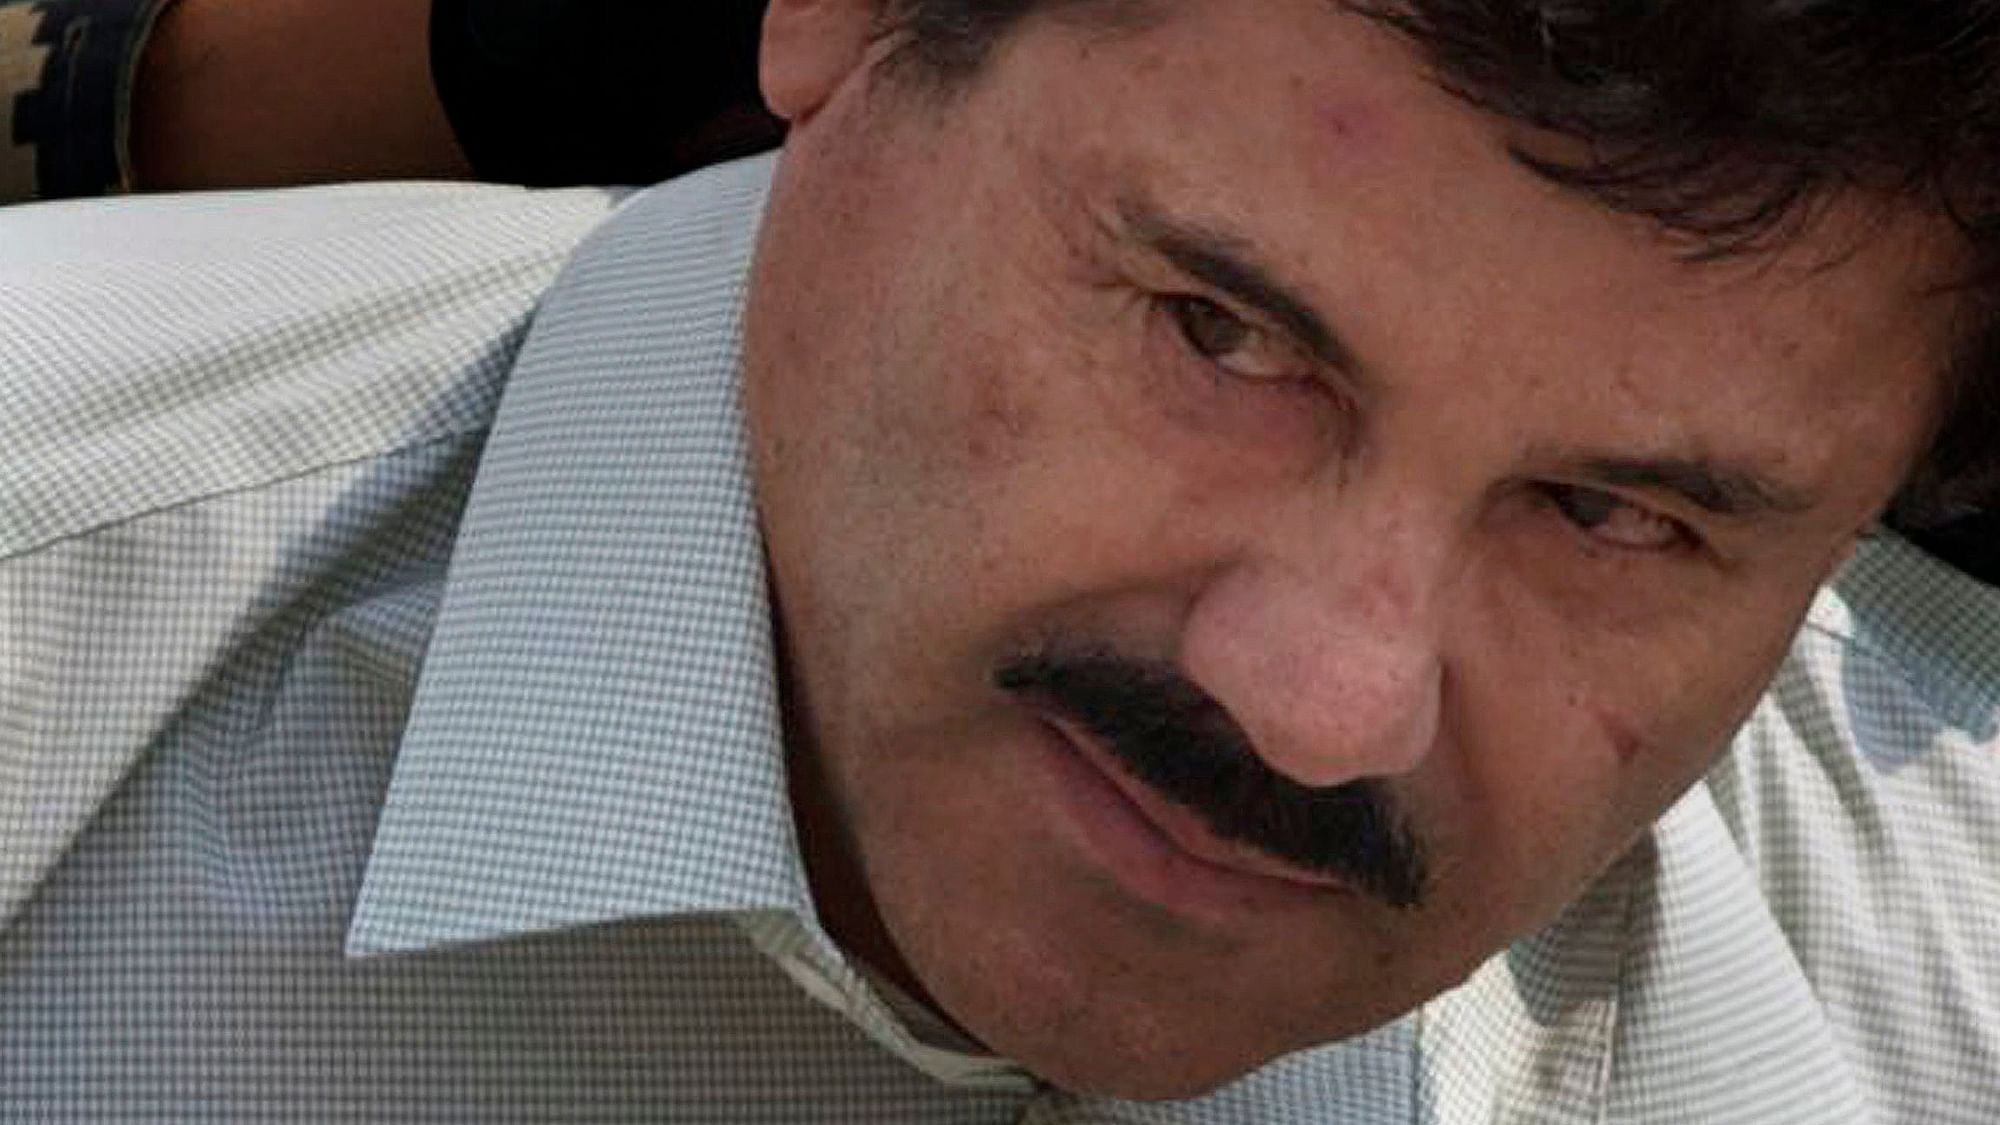 The 62-year-old drug lord was brought to the US to stand trial after he twice escaped from Mexican prisons.